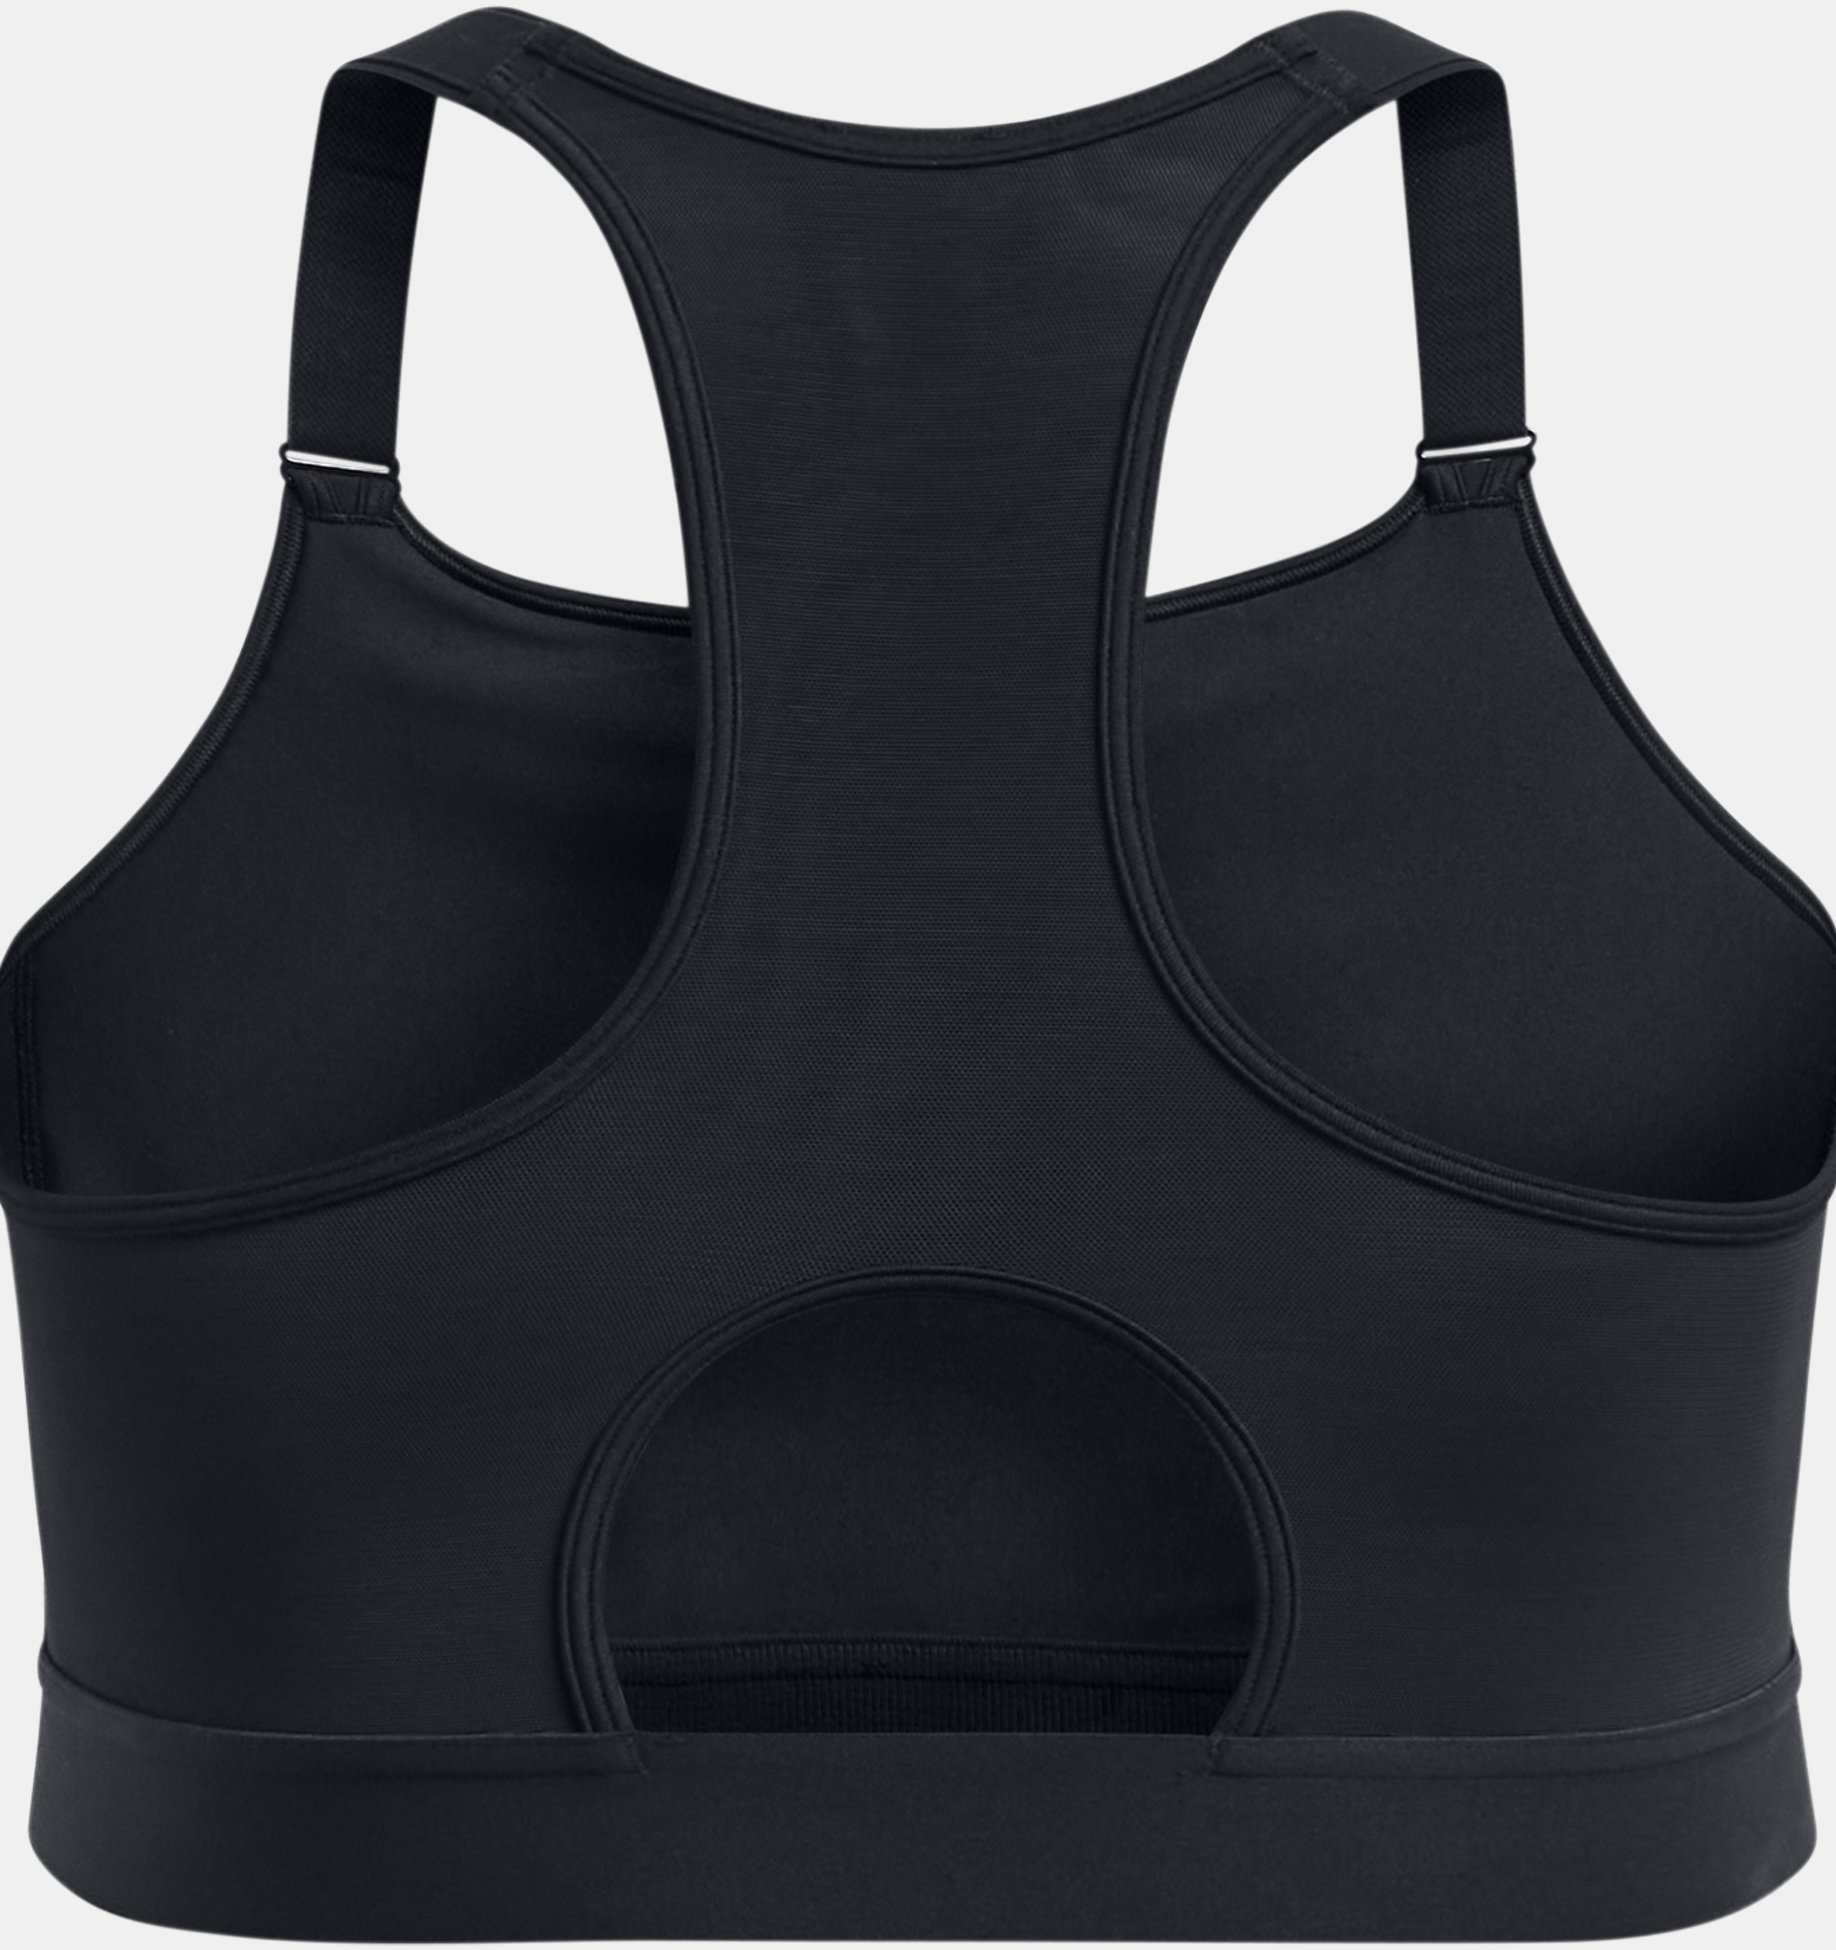 https://underarmour.scene7.com/is/image/Underarmour/PS1380288-001_HB?rp=standard-0pad|pdpZoomDesktop&scl=0.72&fmt=jpg&qlt=85&resMode=sharp2&cache=on,on&bgc=f0f0f0&wid=1836&hei=1950&size=1500,1500